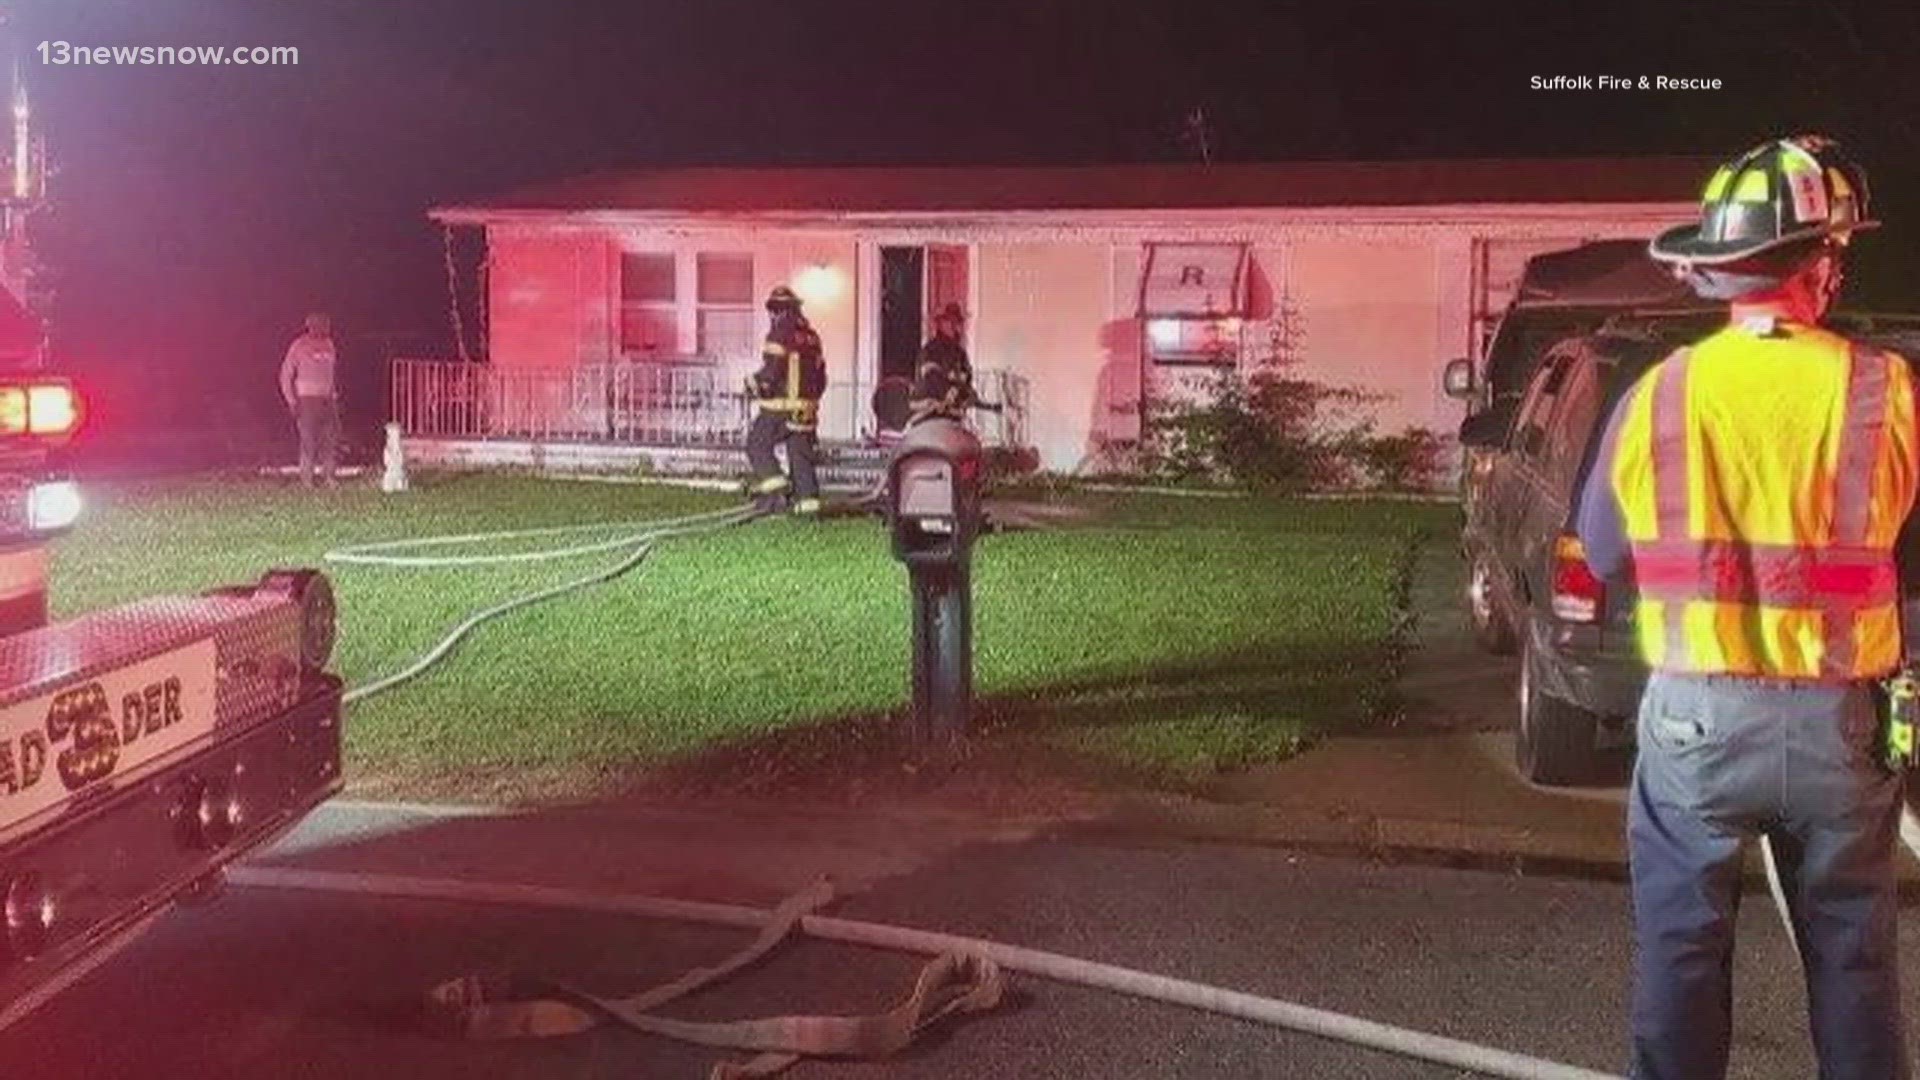 A person had to go to the hospital after a house in Suffolk caught on fire Monday night, the city's fire department wrote in a press release.